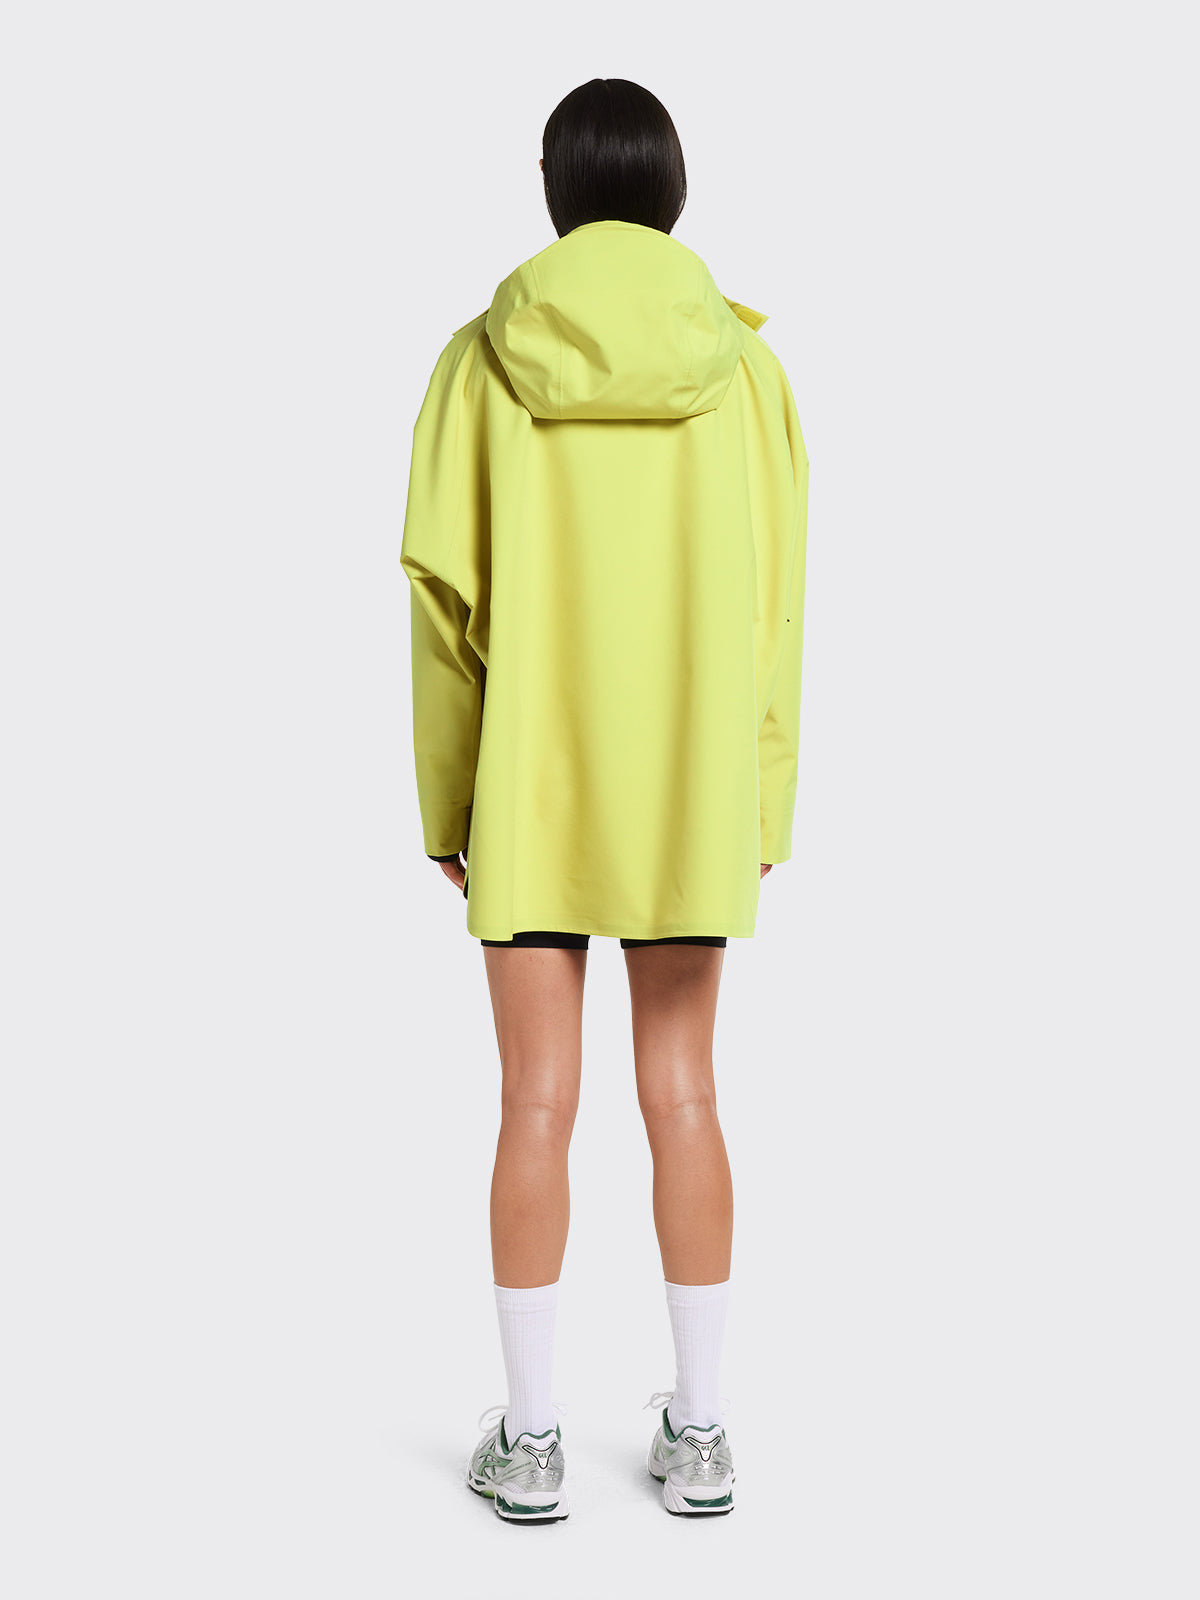 Voss poncho in the color Muted Lime by Blæst